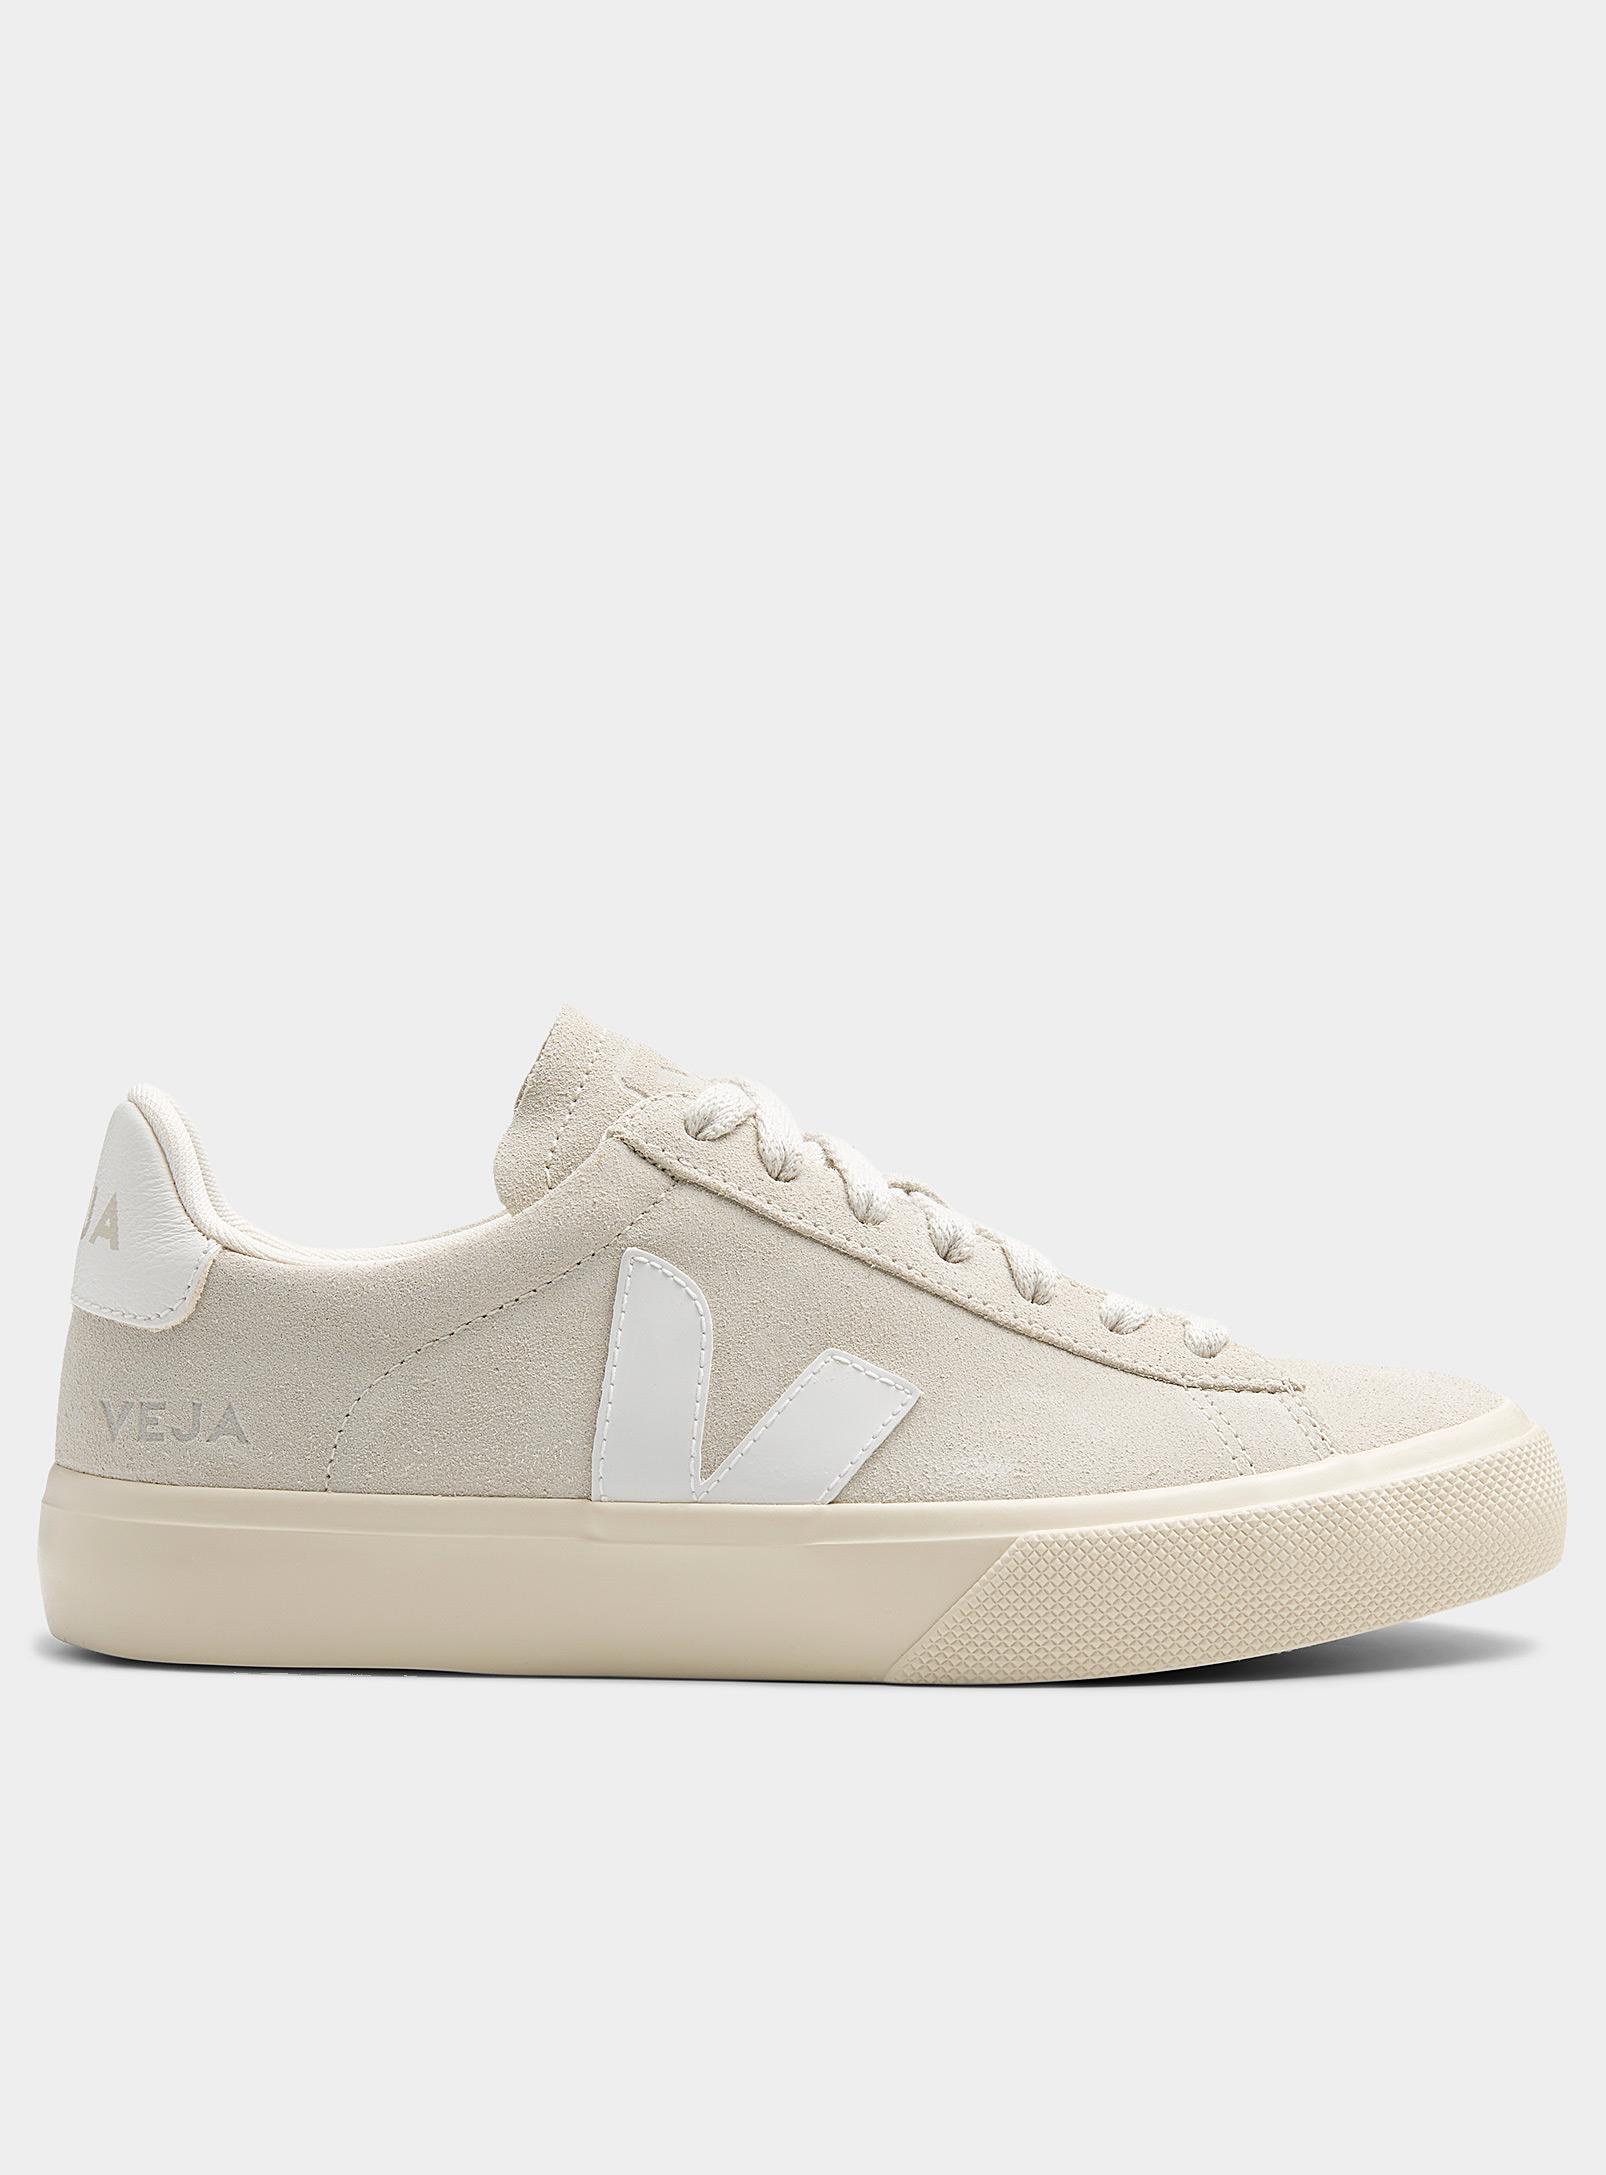 Veja Campo Sneakers Women in Natural | Lyst